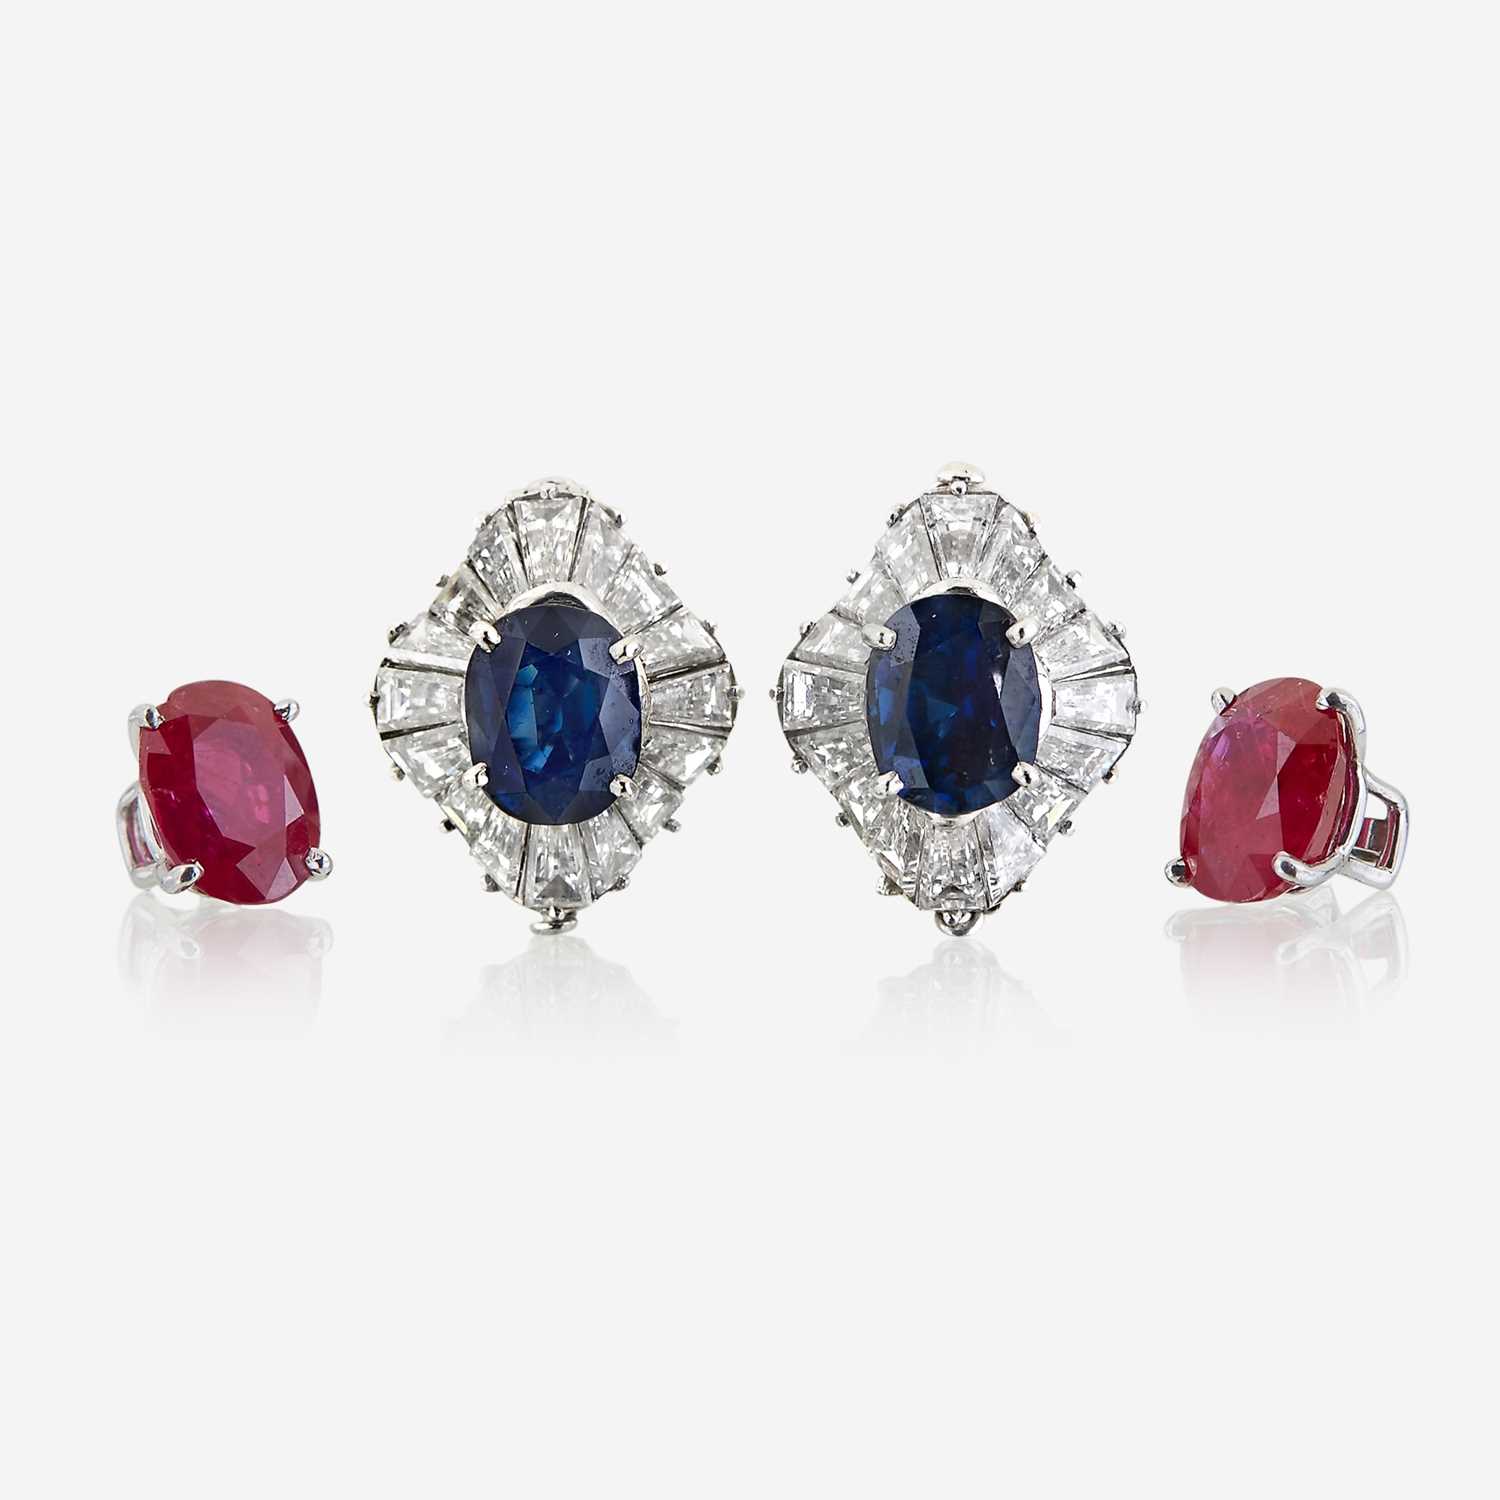 Lot 54 - A pair of diamond and platinum earring jackets with interchangeable ruby and sapphire studs